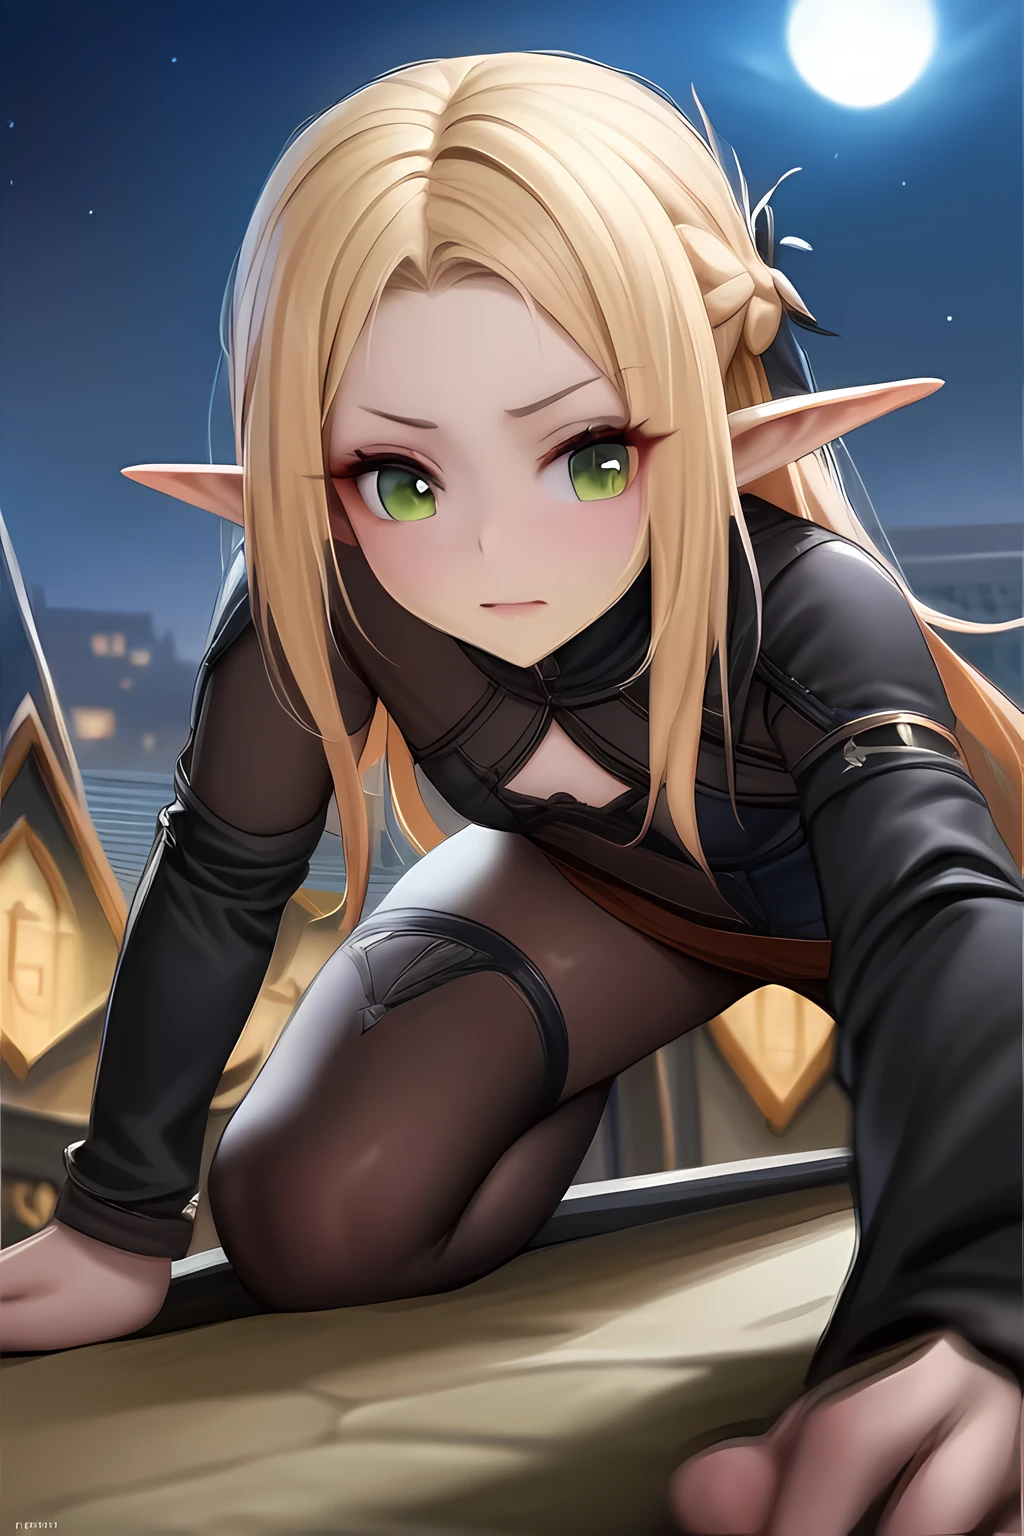 antasy art, d&d art, rpg art, realistic art, goth art, a, high details, best quality, 16k, [ultra detailed], masterpiece, best quality, (extremely detailed), dynamic angle, RAW, photorealistic, a picture of an epic fantasy thief , kneeling on roof top (best details, Masterpiece, best quality: 1.5) on top of a roof in goth fantasy city, ready for action, plenty of buildings, a temple (best details, Masterpiece, best quality: 1.5), female elf (best details, Masterpiece, best quality: 1.5), epic fantasy thief, [[anatomically correct]], blond hair, braided hair, fair skin, intense bright eyes, armed with dagger, dynamic position (intricate details, Masterpiece, best quality: 1.5), small pointed ears, dark armor, full leather armor (intricate details, Masterpiece, best quality: 1.5), tense atmosphere, night, stars light, moon light, moon rays, stars, best details, best quality, highres, ultra wide angle, drkfntasy night over the roof top of a goth church, the elf watches the city below, it is ready to act, medieval city background